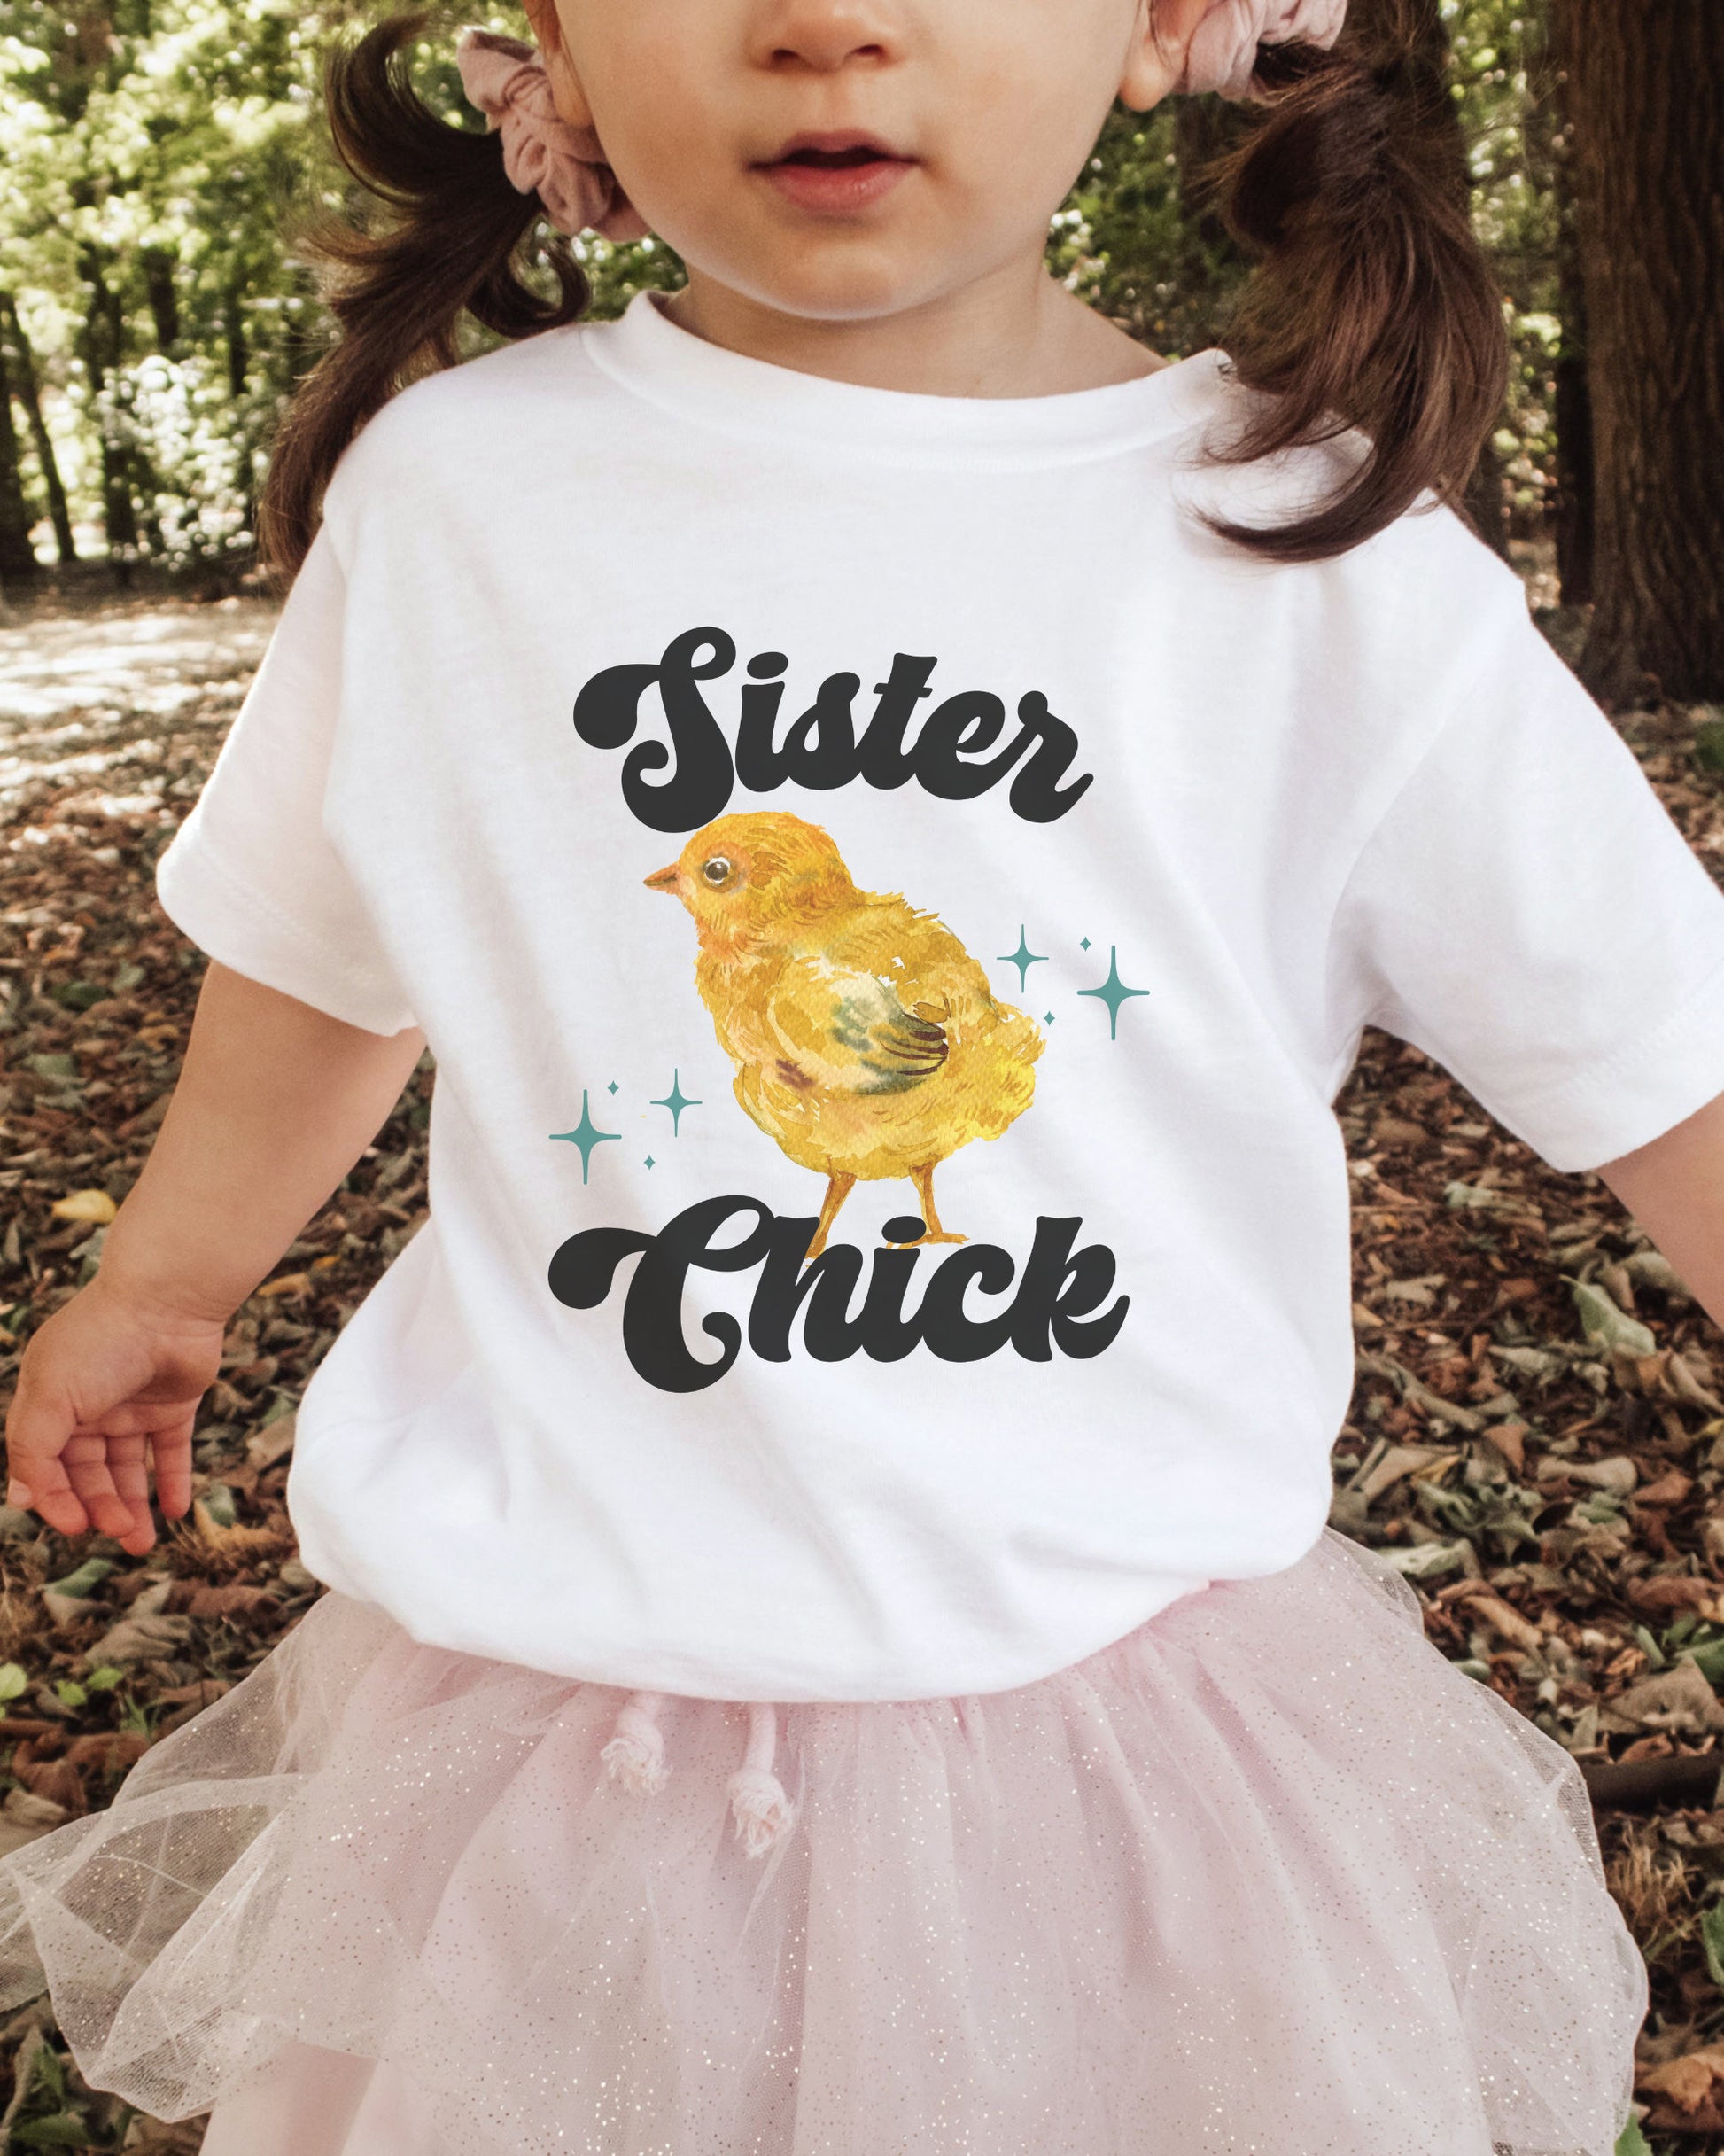 Family Chicken Shirts Matching Family Farm Birthday Party Little Chick Baby Bodysuit Mother Clucker Daddy Doodle Doo Barnyard Chicken Tee